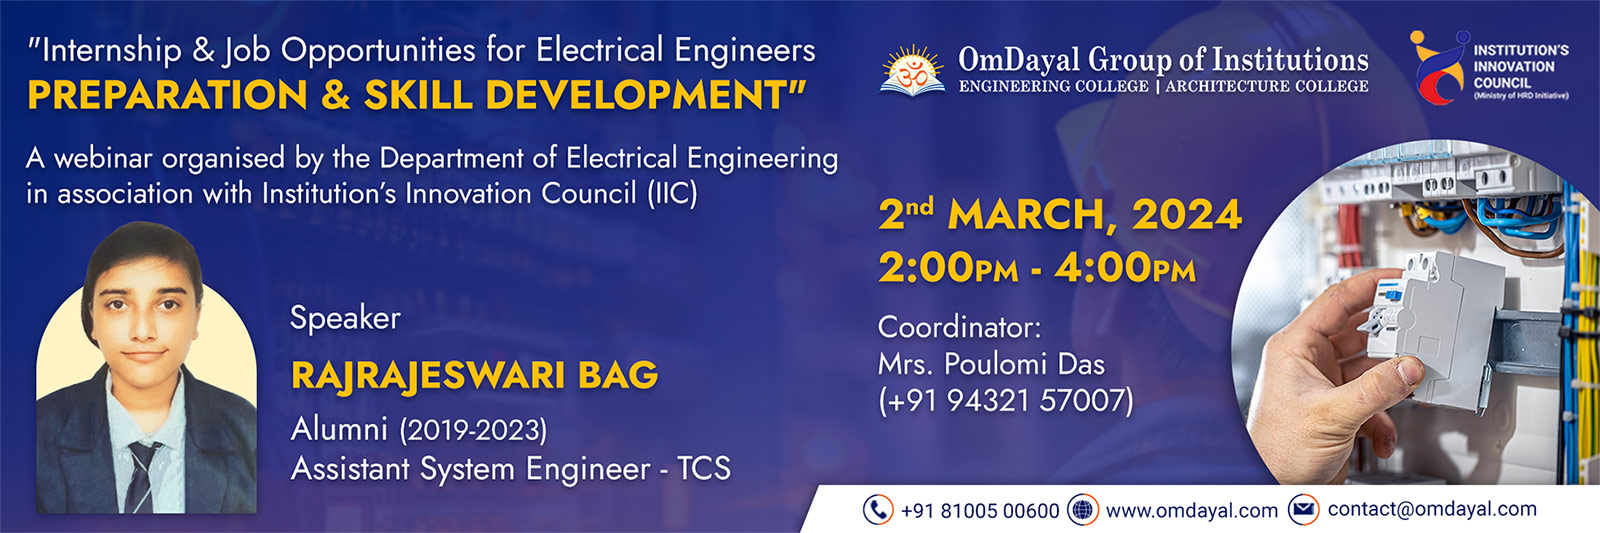 Internship and Job Opportunities for Electrical Engineers - Preparation and Skill Development